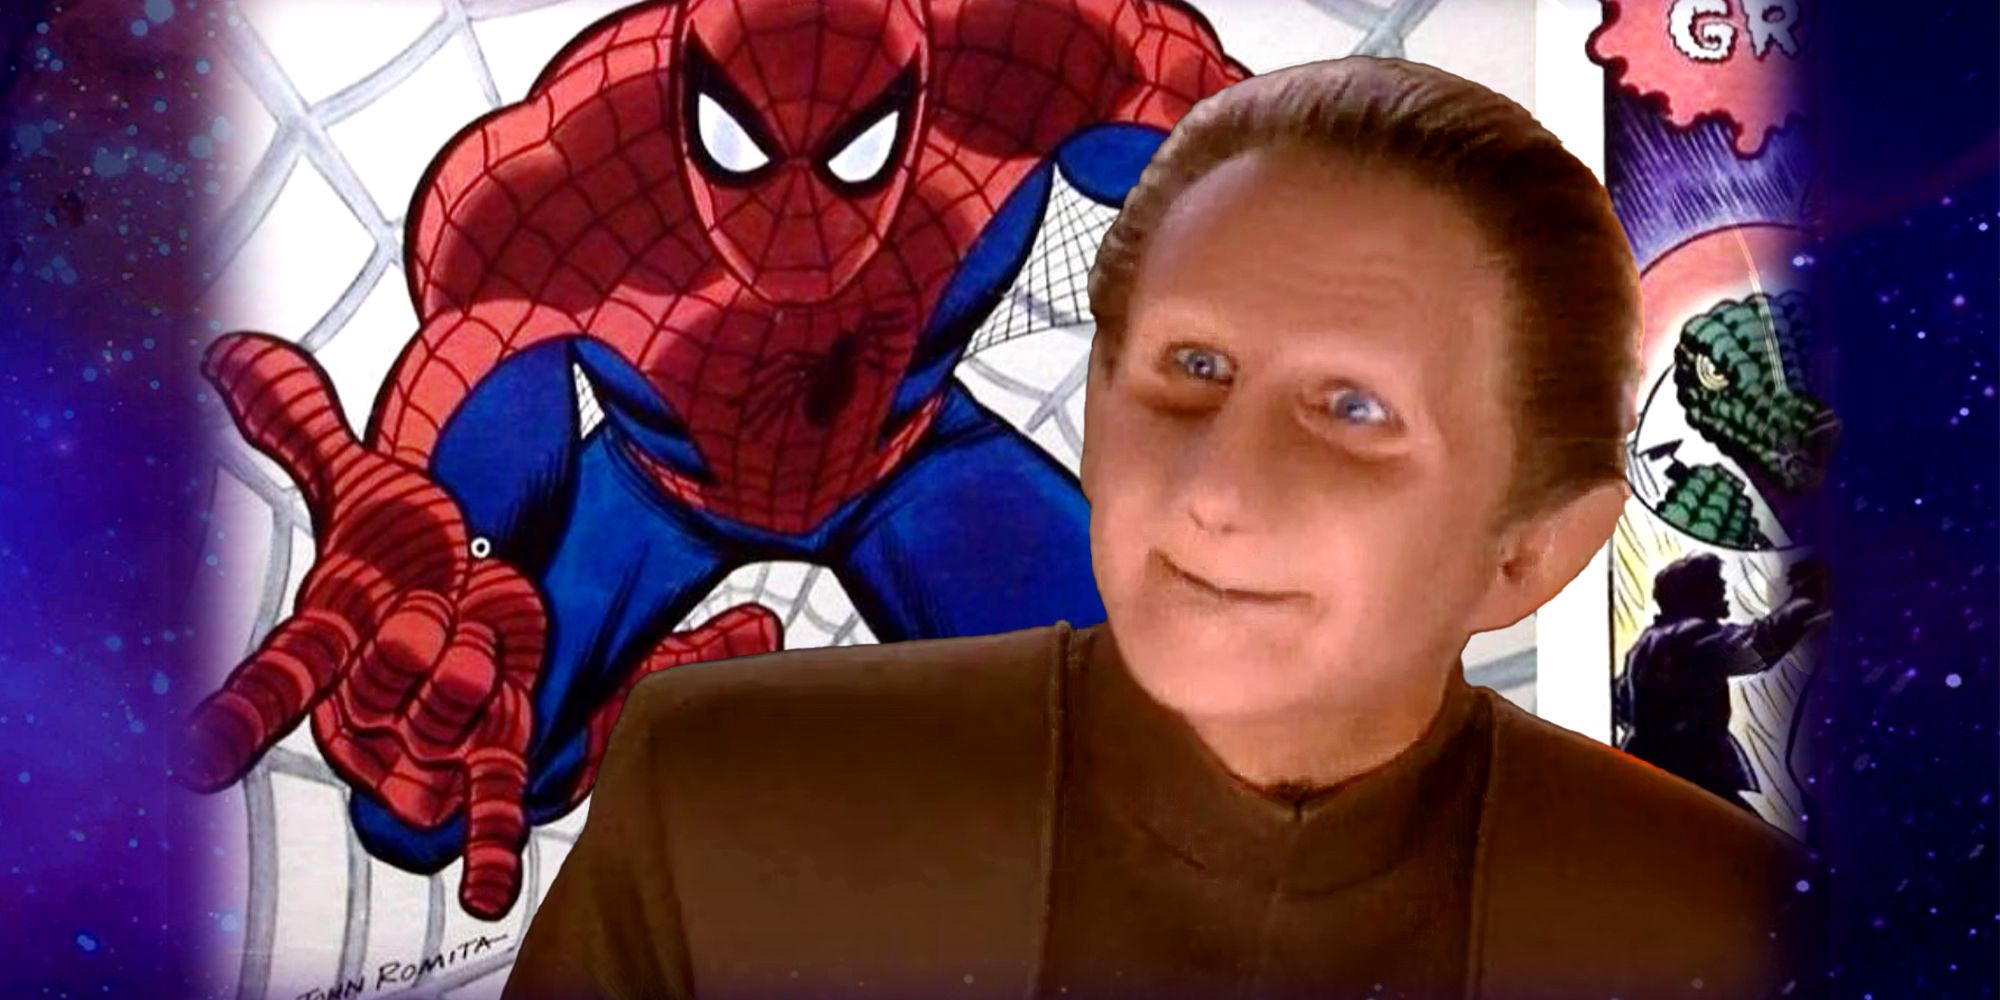 Spider-Man and DS9's Odo